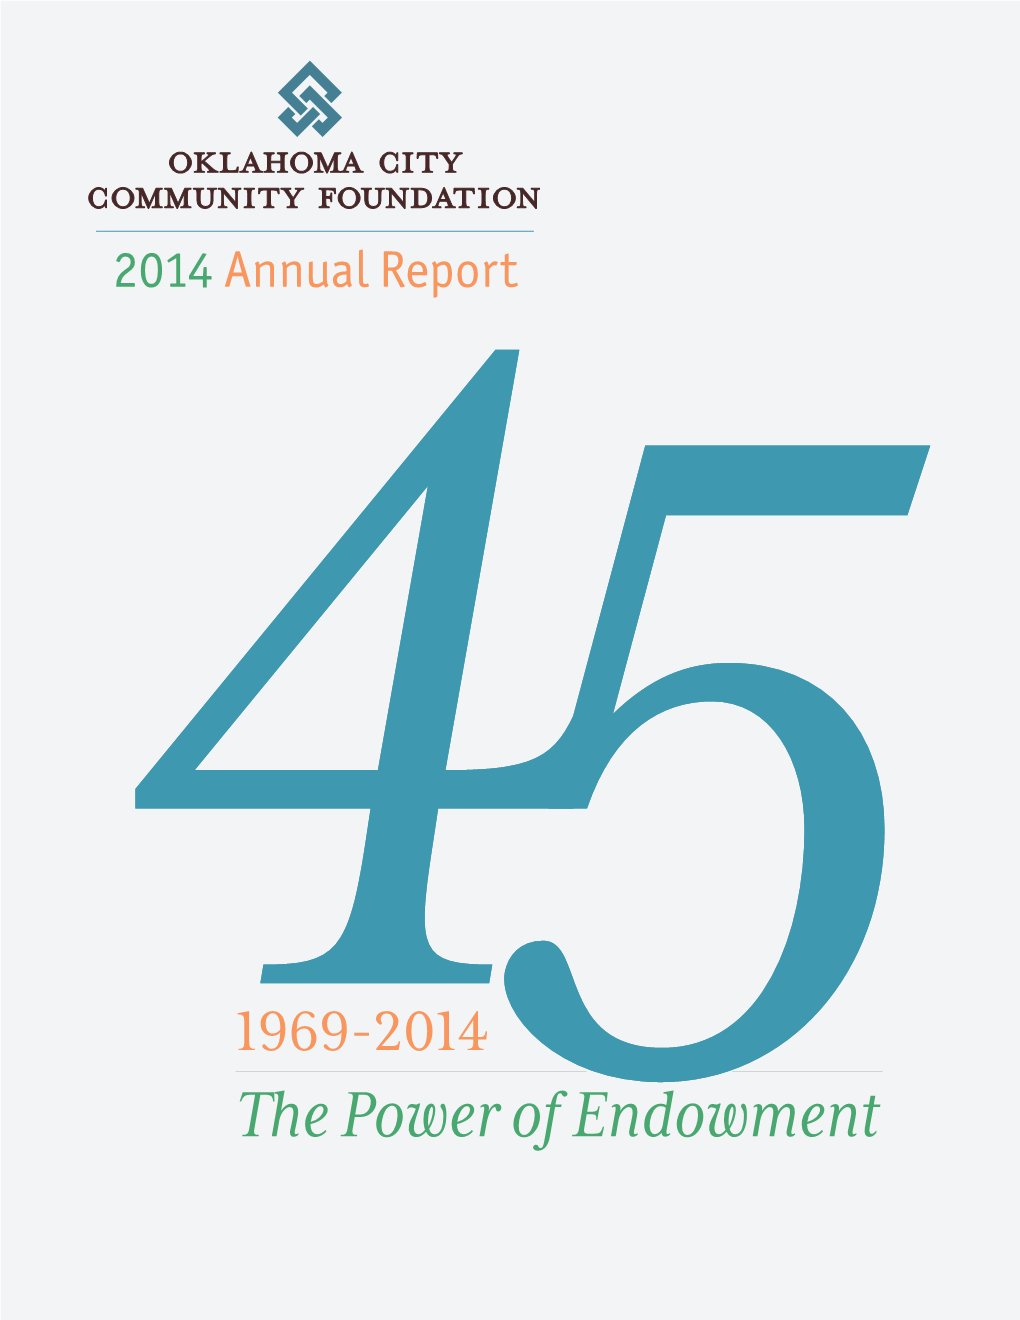 The Power of Endowment Equates to ‘Doing for Others’ Both Now and Well Into the Future